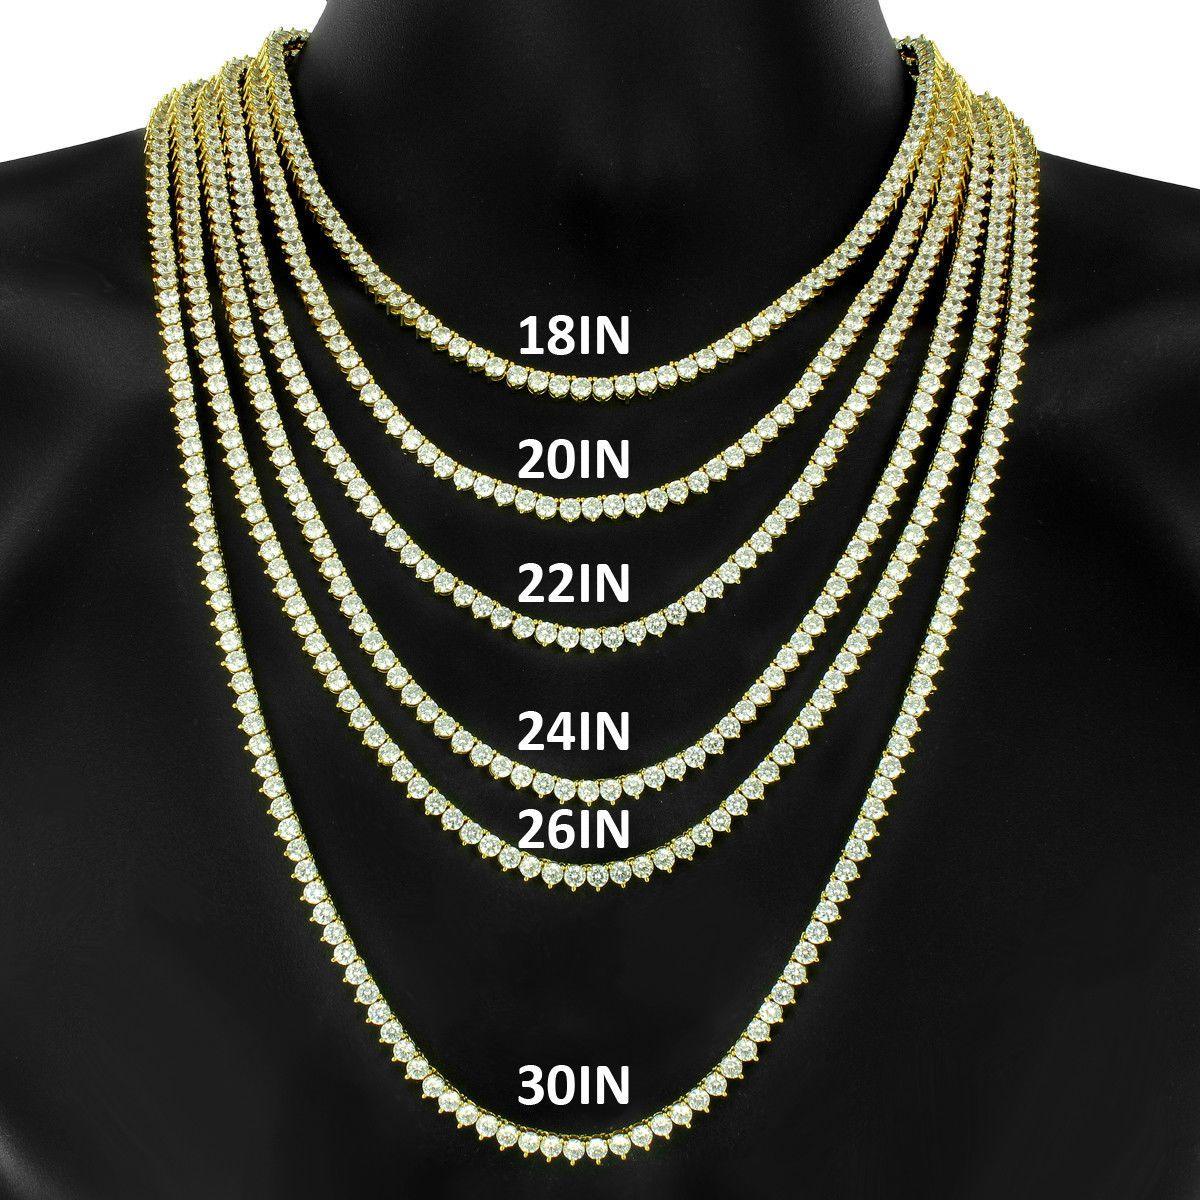 4mm Moissanite Tennis Chain - The Real Jewelry CompanyThe Real Jewelry CompanyNecklaces